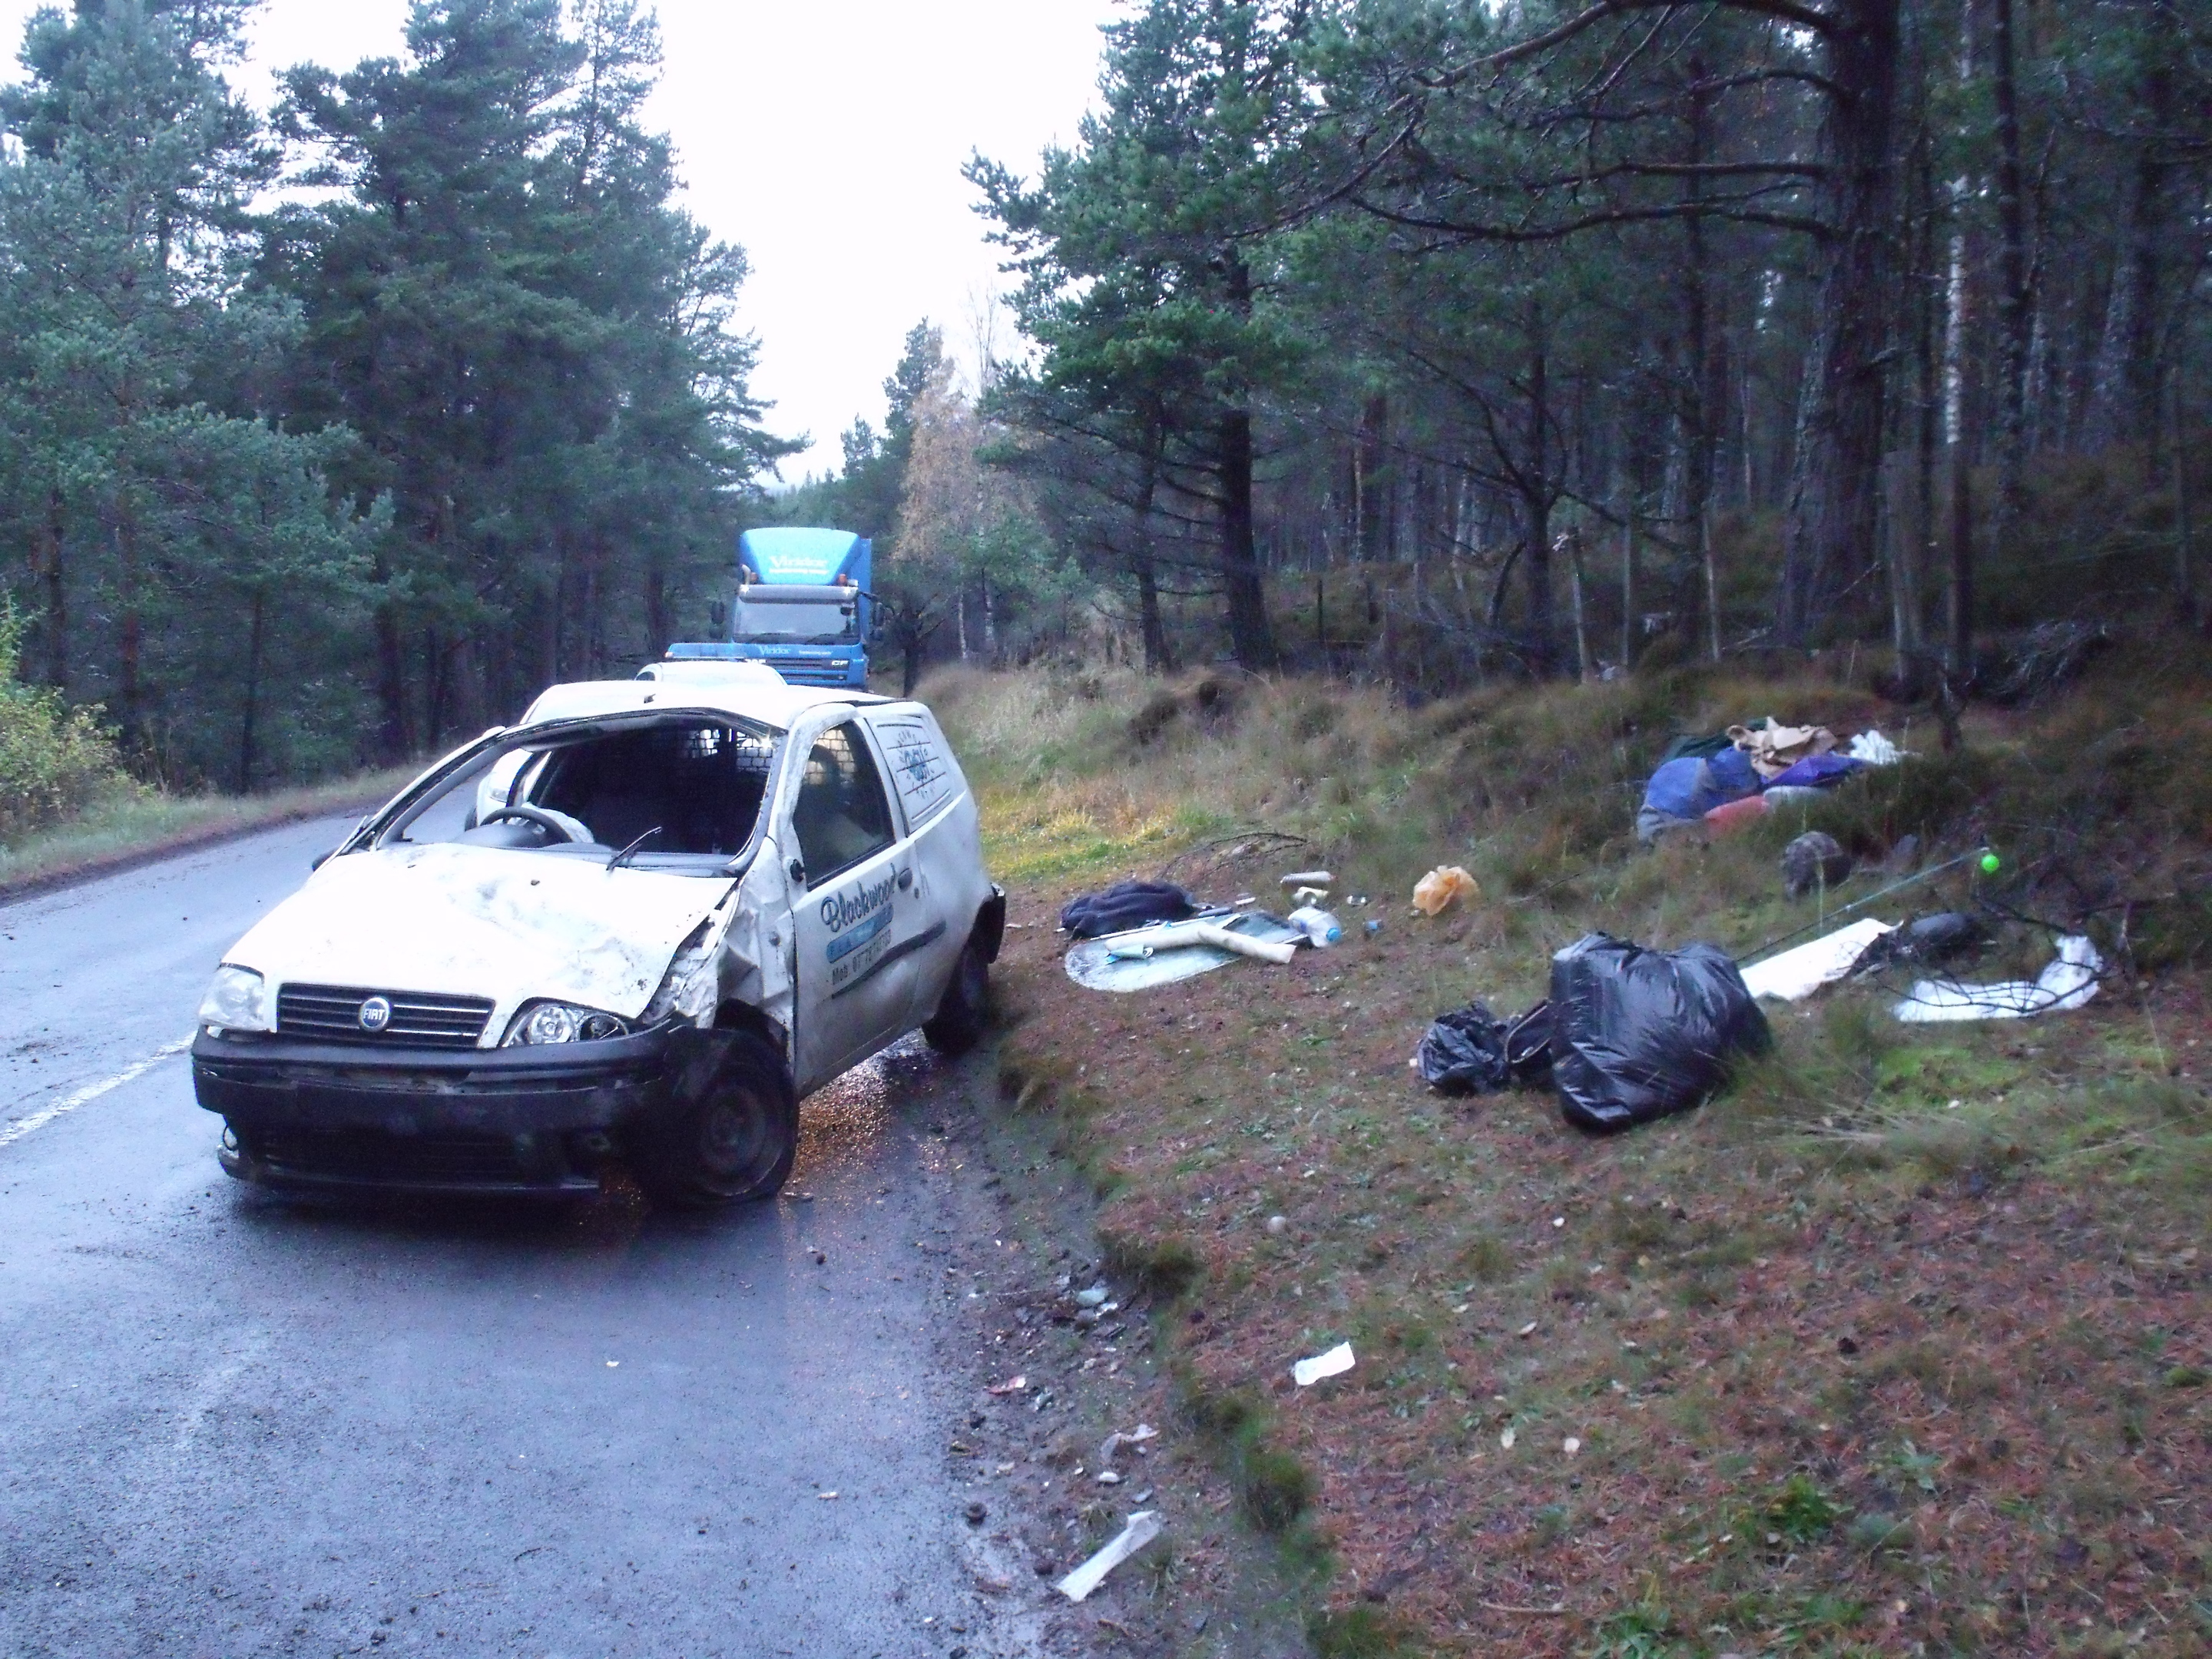 The scene after the crash on the A938 near Carrbridge this morning.